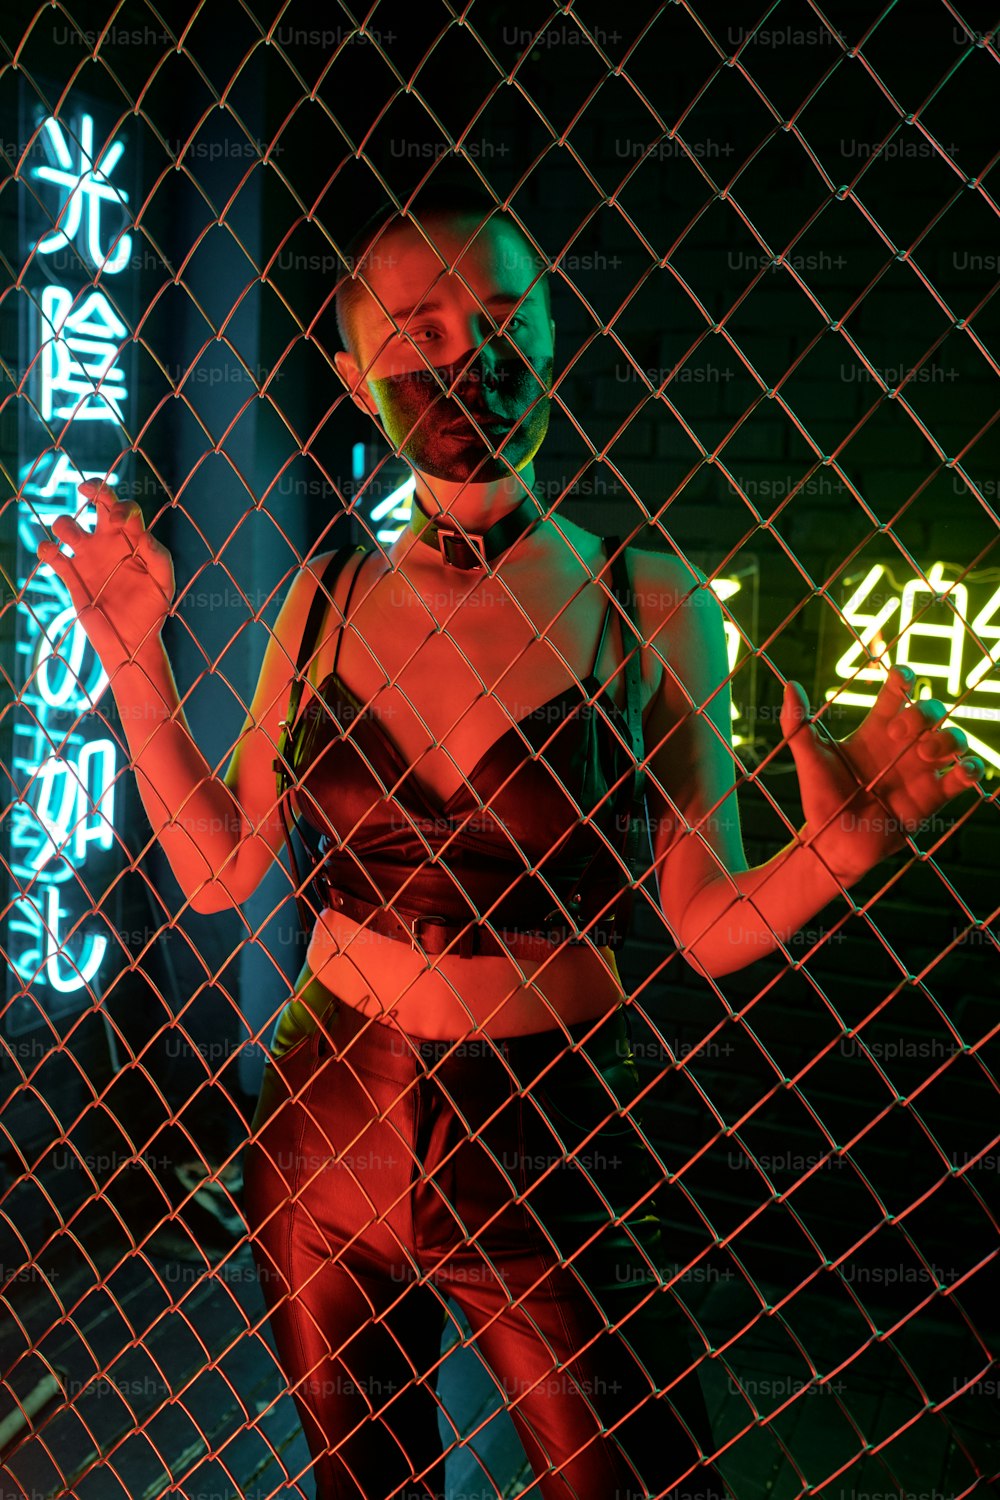 Cyberpunk girl standing in leather costume behind the bars with neon hieroglyphs meaning nirvana and western paradise